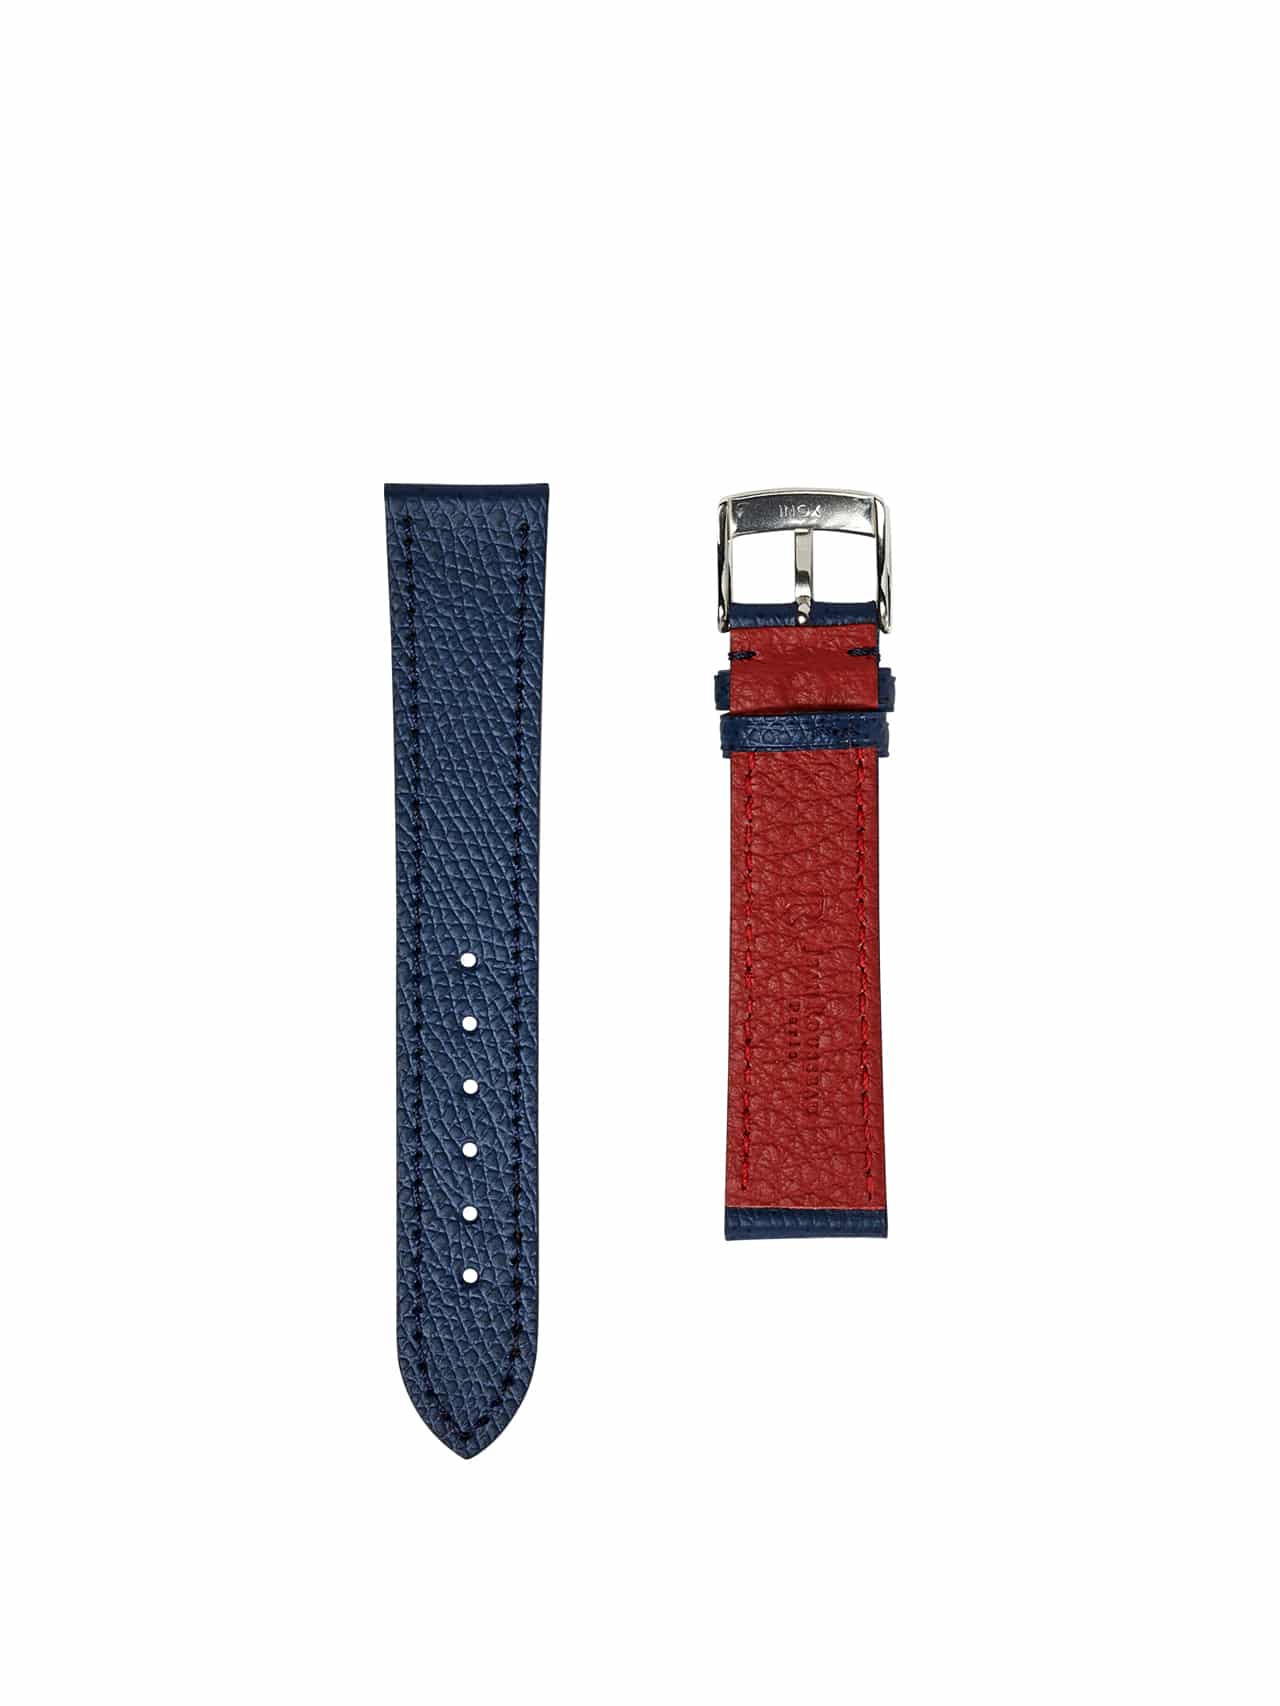 jean rousseau leather strap blue red